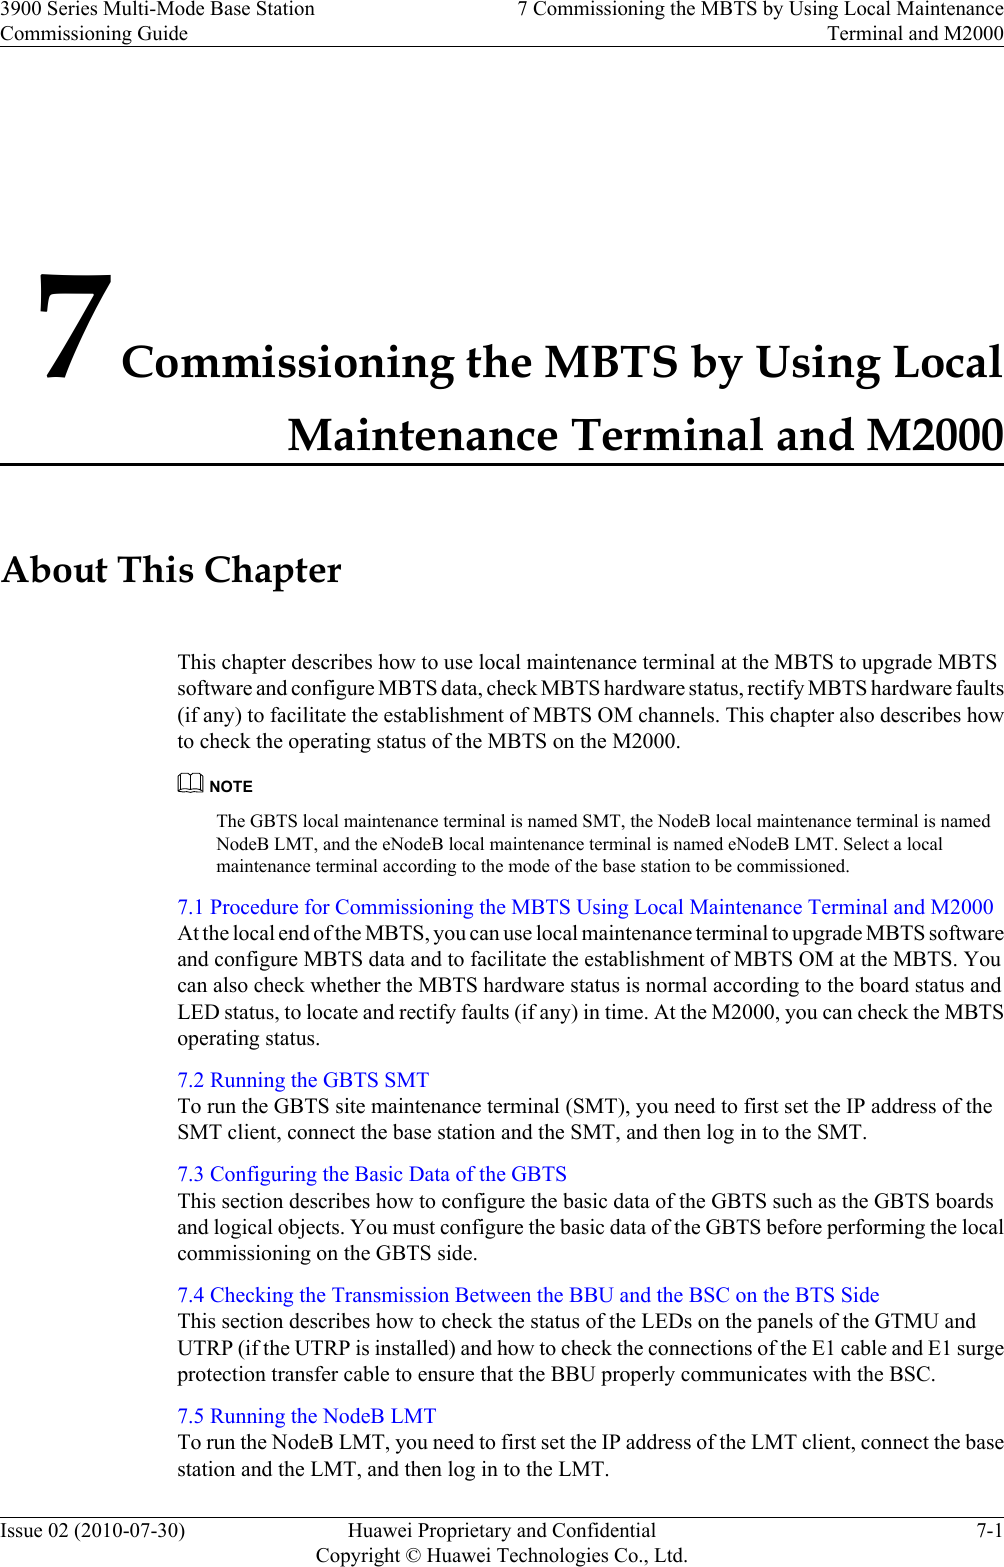 7 Commissioning the MBTS by Using LocalMaintenance Terminal and M2000About This ChapterThis chapter describes how to use local maintenance terminal at the MBTS to upgrade MBTSsoftware and configure MBTS data, check MBTS hardware status, rectify MBTS hardware faults(if any) to facilitate the establishment of MBTS OM channels. This chapter also describes howto check the operating status of the MBTS on the M2000.NOTEThe GBTS local maintenance terminal is named SMT, the NodeB local maintenance terminal is namedNodeB LMT, and the eNodeB local maintenance terminal is named eNodeB LMT. Select a localmaintenance terminal according to the mode of the base station to be commissioned.7.1 Procedure for Commissioning the MBTS Using Local Maintenance Terminal and M2000At the local end of the MBTS, you can use local maintenance terminal to upgrade MBTS softwareand configure MBTS data and to facilitate the establishment of MBTS OM at the MBTS. Youcan also check whether the MBTS hardware status is normal according to the board status andLED status, to locate and rectify faults (if any) in time. At the M2000, you can check the MBTSoperating status.7.2 Running the GBTS SMTTo run the GBTS site maintenance terminal (SMT), you need to first set the IP address of theSMT client, connect the base station and the SMT, and then log in to the SMT.7.3 Configuring the Basic Data of the GBTSThis section describes how to configure the basic data of the GBTS such as the GBTS boardsand logical objects. You must configure the basic data of the GBTS before performing the localcommissioning on the GBTS side.7.4 Checking the Transmission Between the BBU and the BSC on the BTS SideThis section describes how to check the status of the LEDs on the panels of the GTMU andUTRP (if the UTRP is installed) and how to check the connections of the E1 cable and E1 surgeprotection transfer cable to ensure that the BBU properly communicates with the BSC.7.5 Running the NodeB LMTTo run the NodeB LMT, you need to first set the IP address of the LMT client, connect the basestation and the LMT, and then log in to the LMT.3900 Series Multi-Mode Base StationCommissioning Guide7 Commissioning the MBTS by Using Local MaintenanceTerminal and M2000Issue 02 (2010-07-30) Huawei Proprietary and ConfidentialCopyright © Huawei Technologies Co., Ltd.7-1